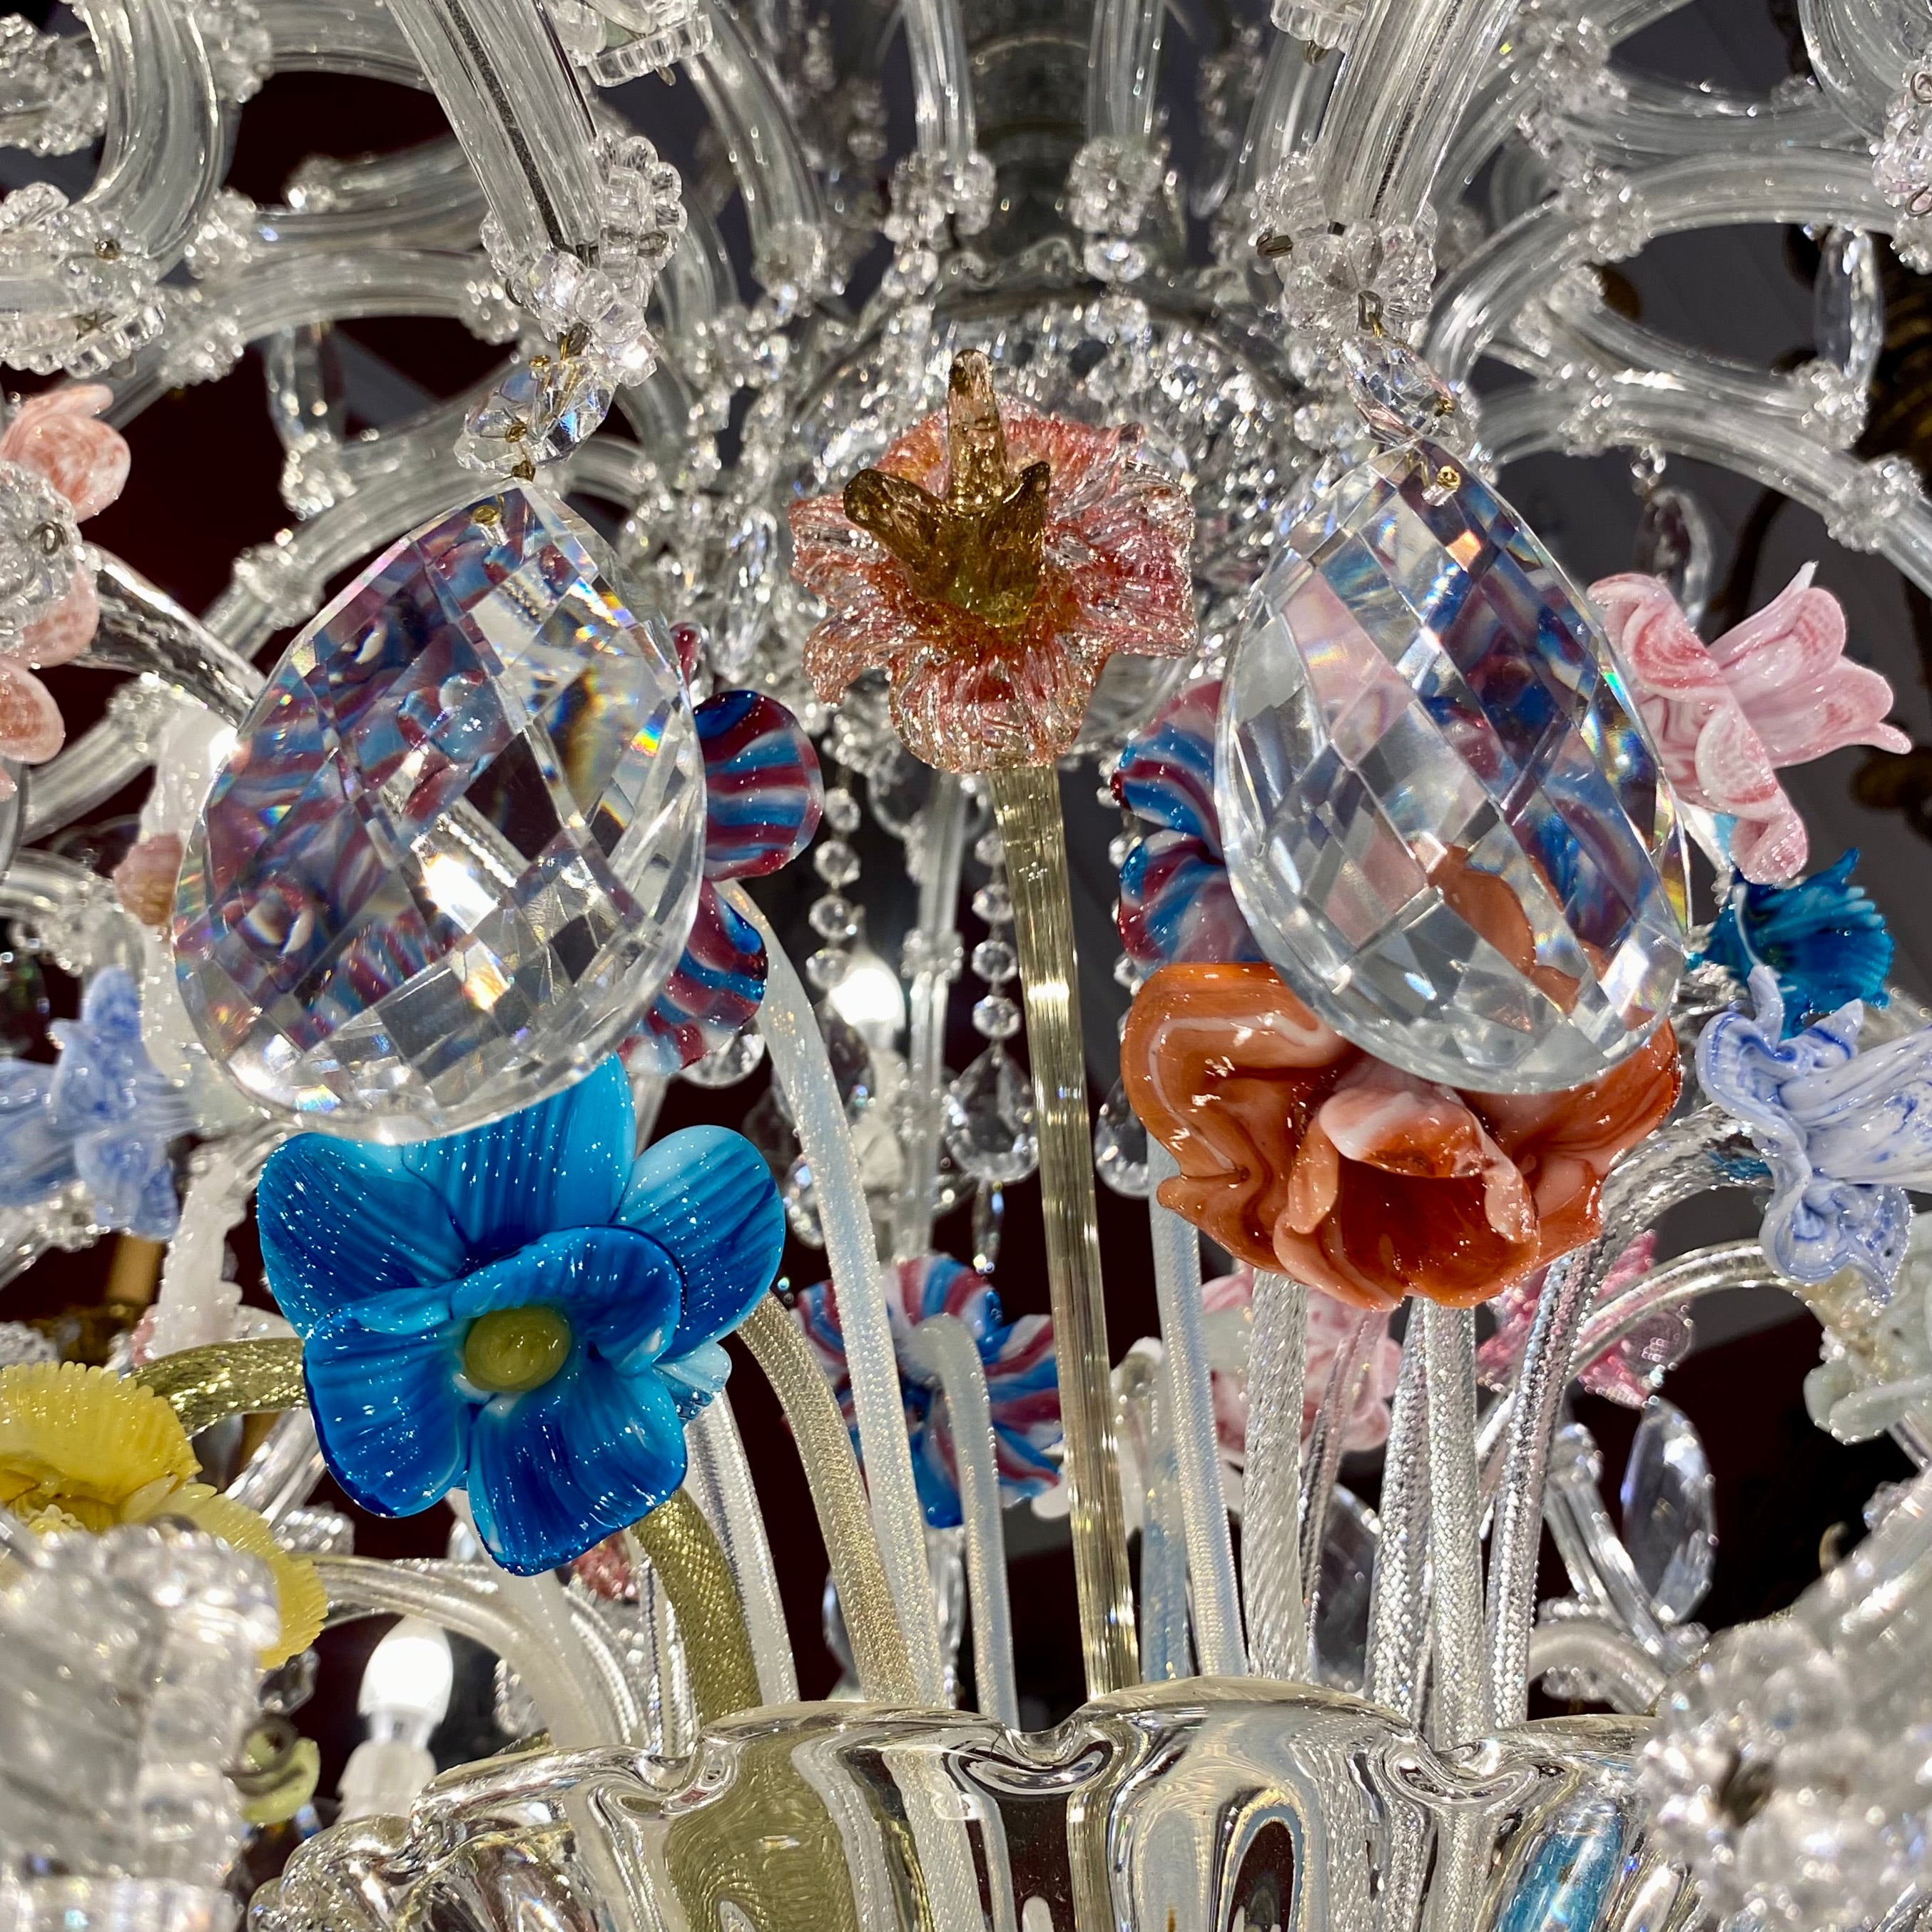 Extremely Rare Antique Maria Theresa Chandelier with Murano Flowers